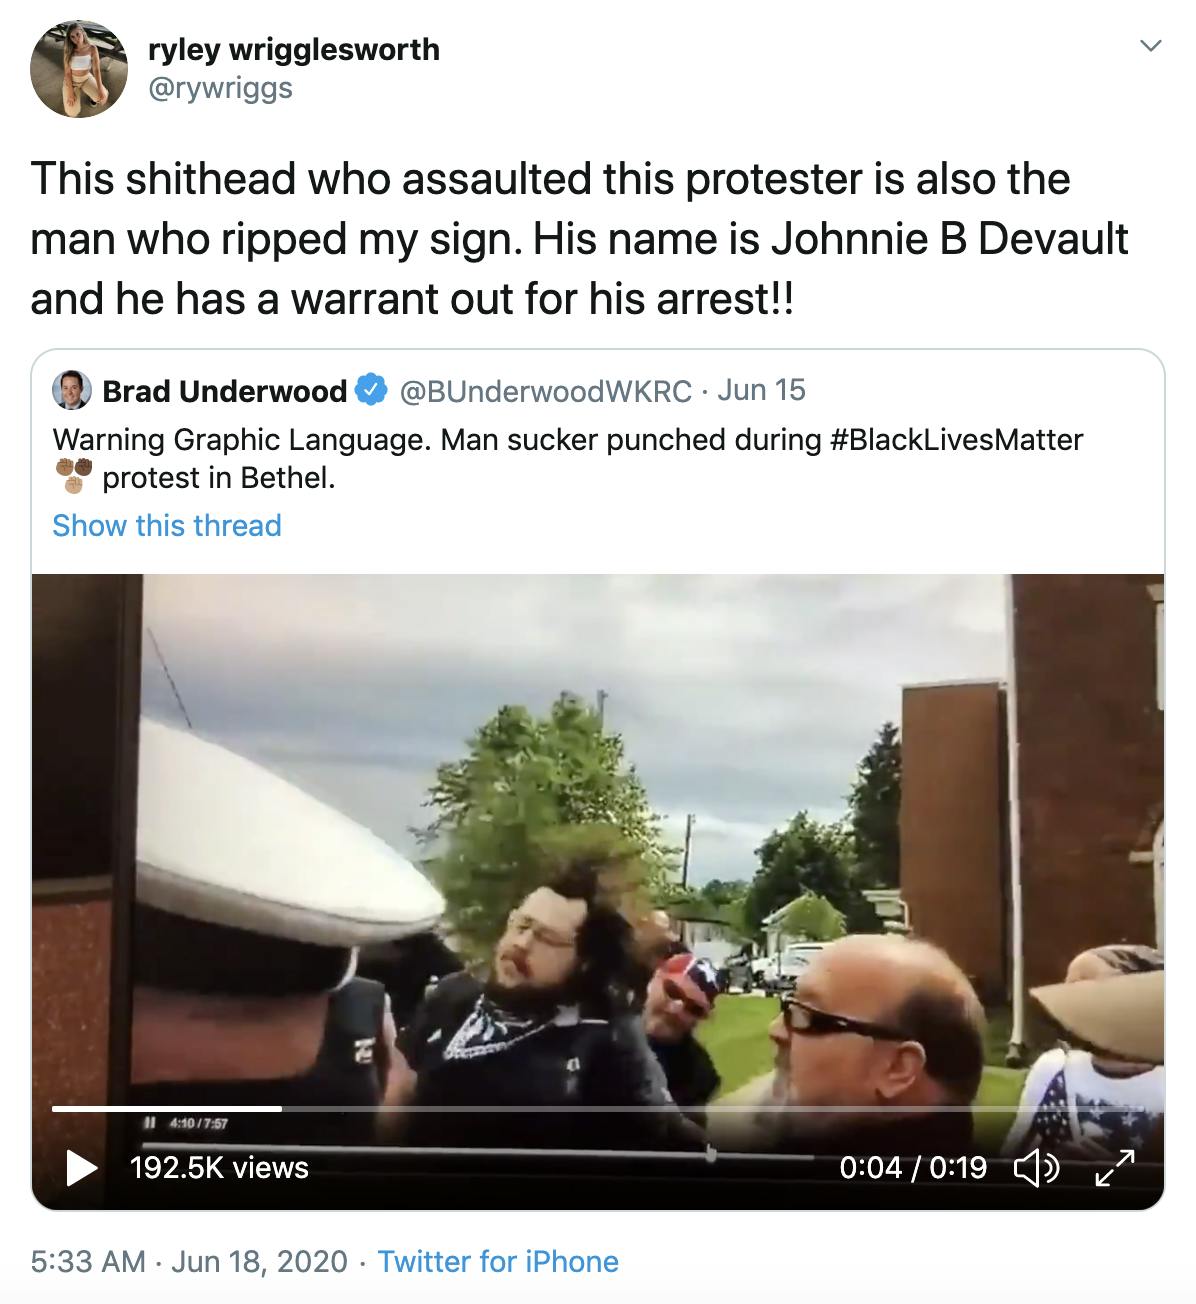 This shithead who assaulted this protester is also the man who ripped my sign. His name is Johnnie B Devault and he has a warrant out for his arrest!!